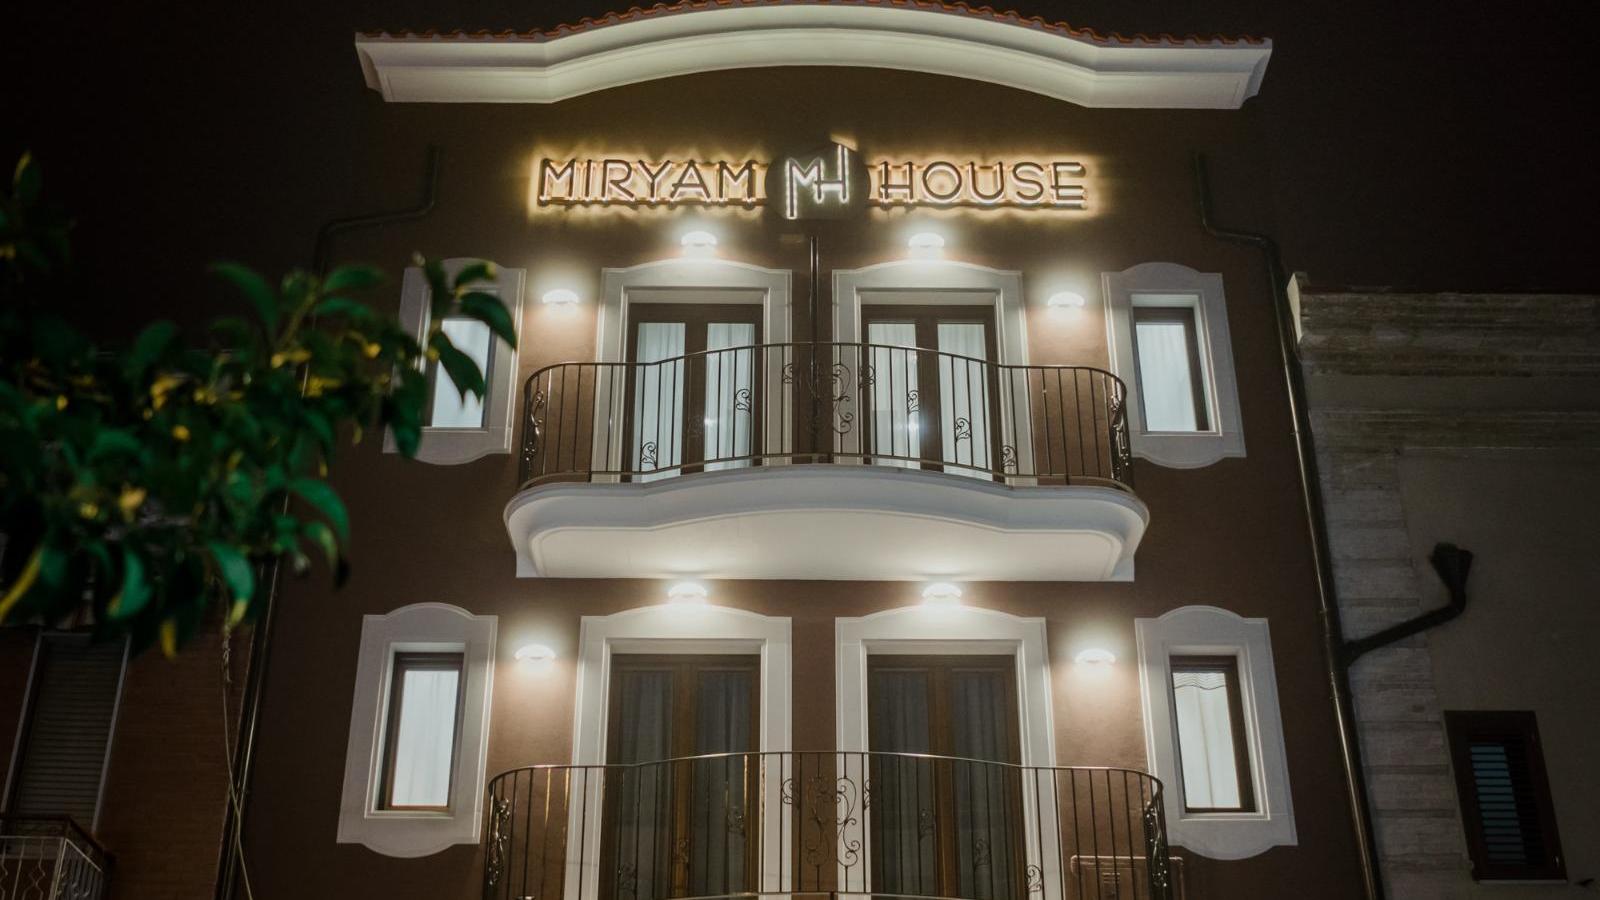 Miryam House Affittacamere Suite e Relax.